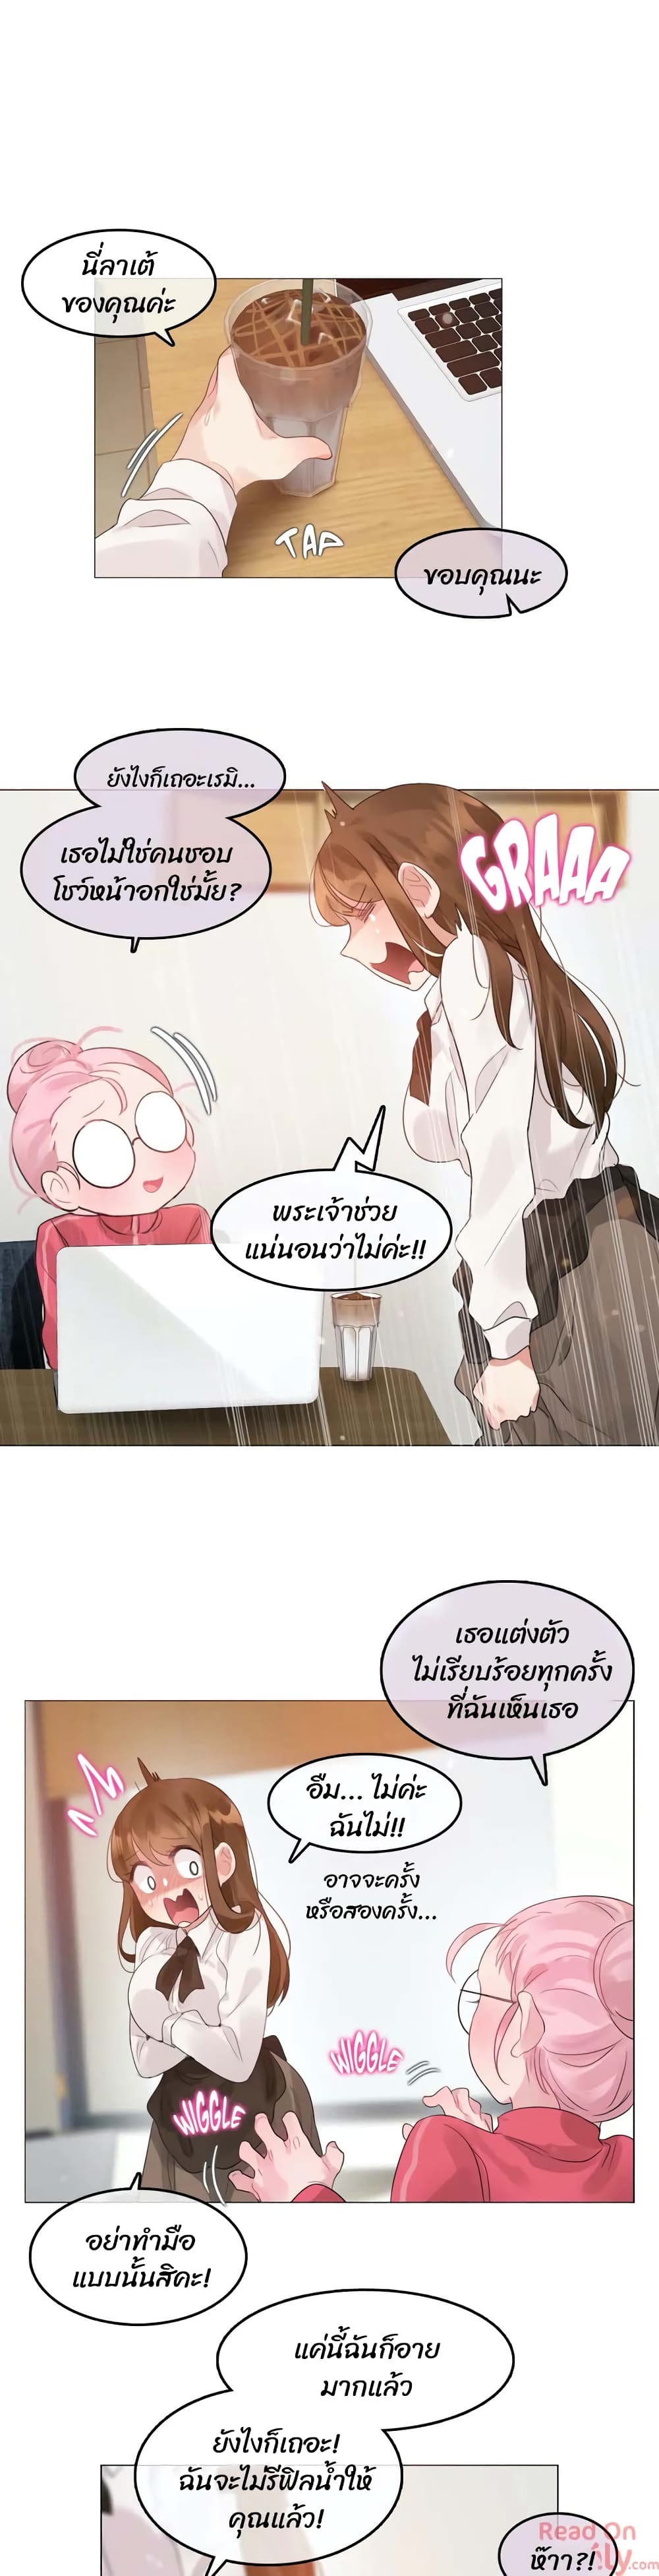 A Pervert's Daily Life 88 (18)